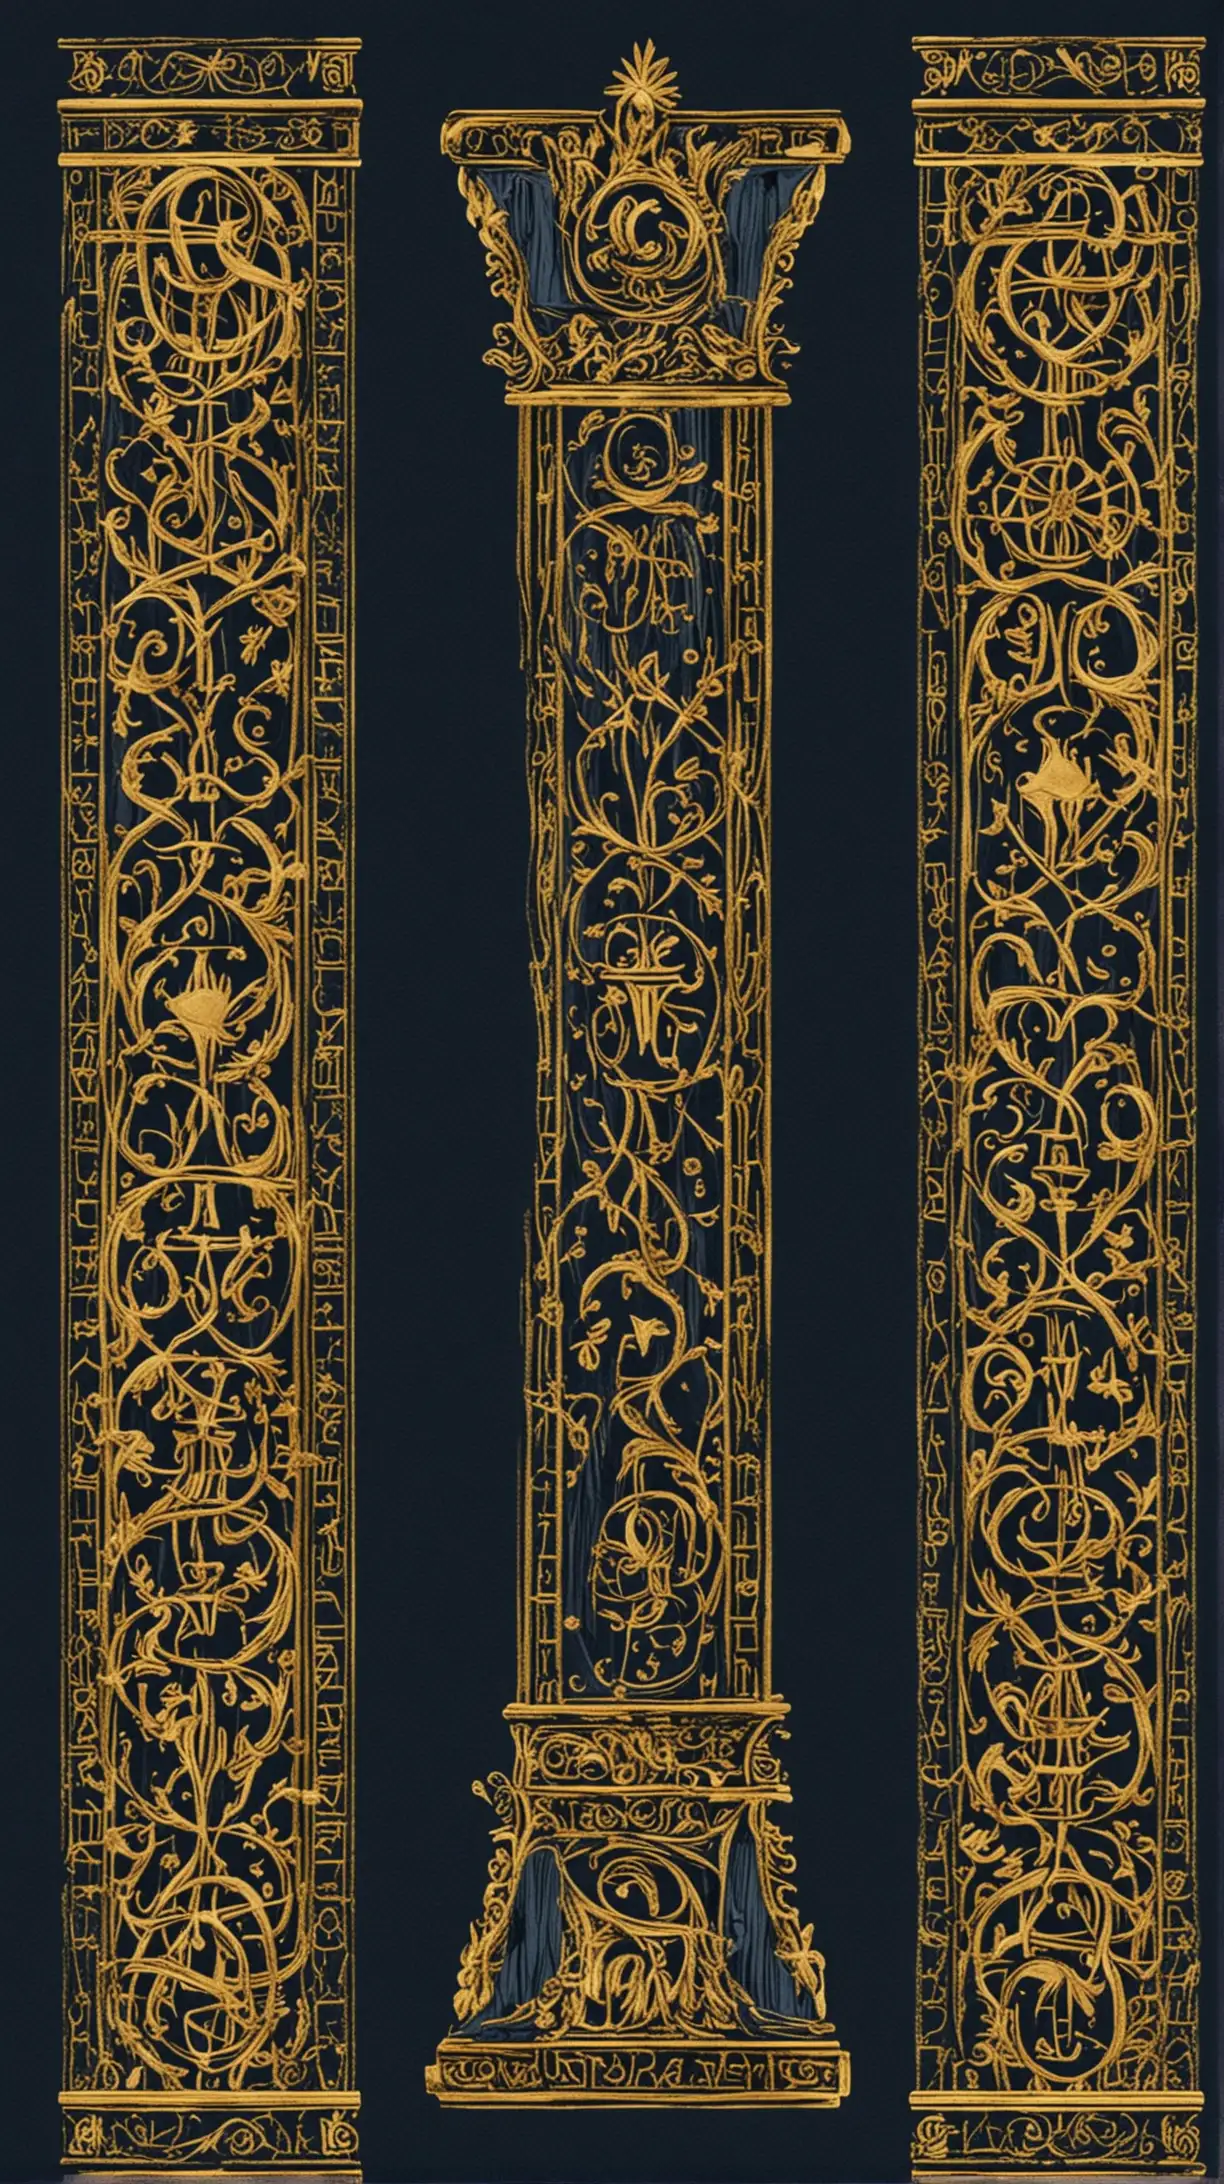 The border design for tarot cards: one greek pilar in the right, one greek pilar in the left, and a blank space in the middle, where the symbol of the tarot card will emerge. dark blue, golden, intricate, beautiful.